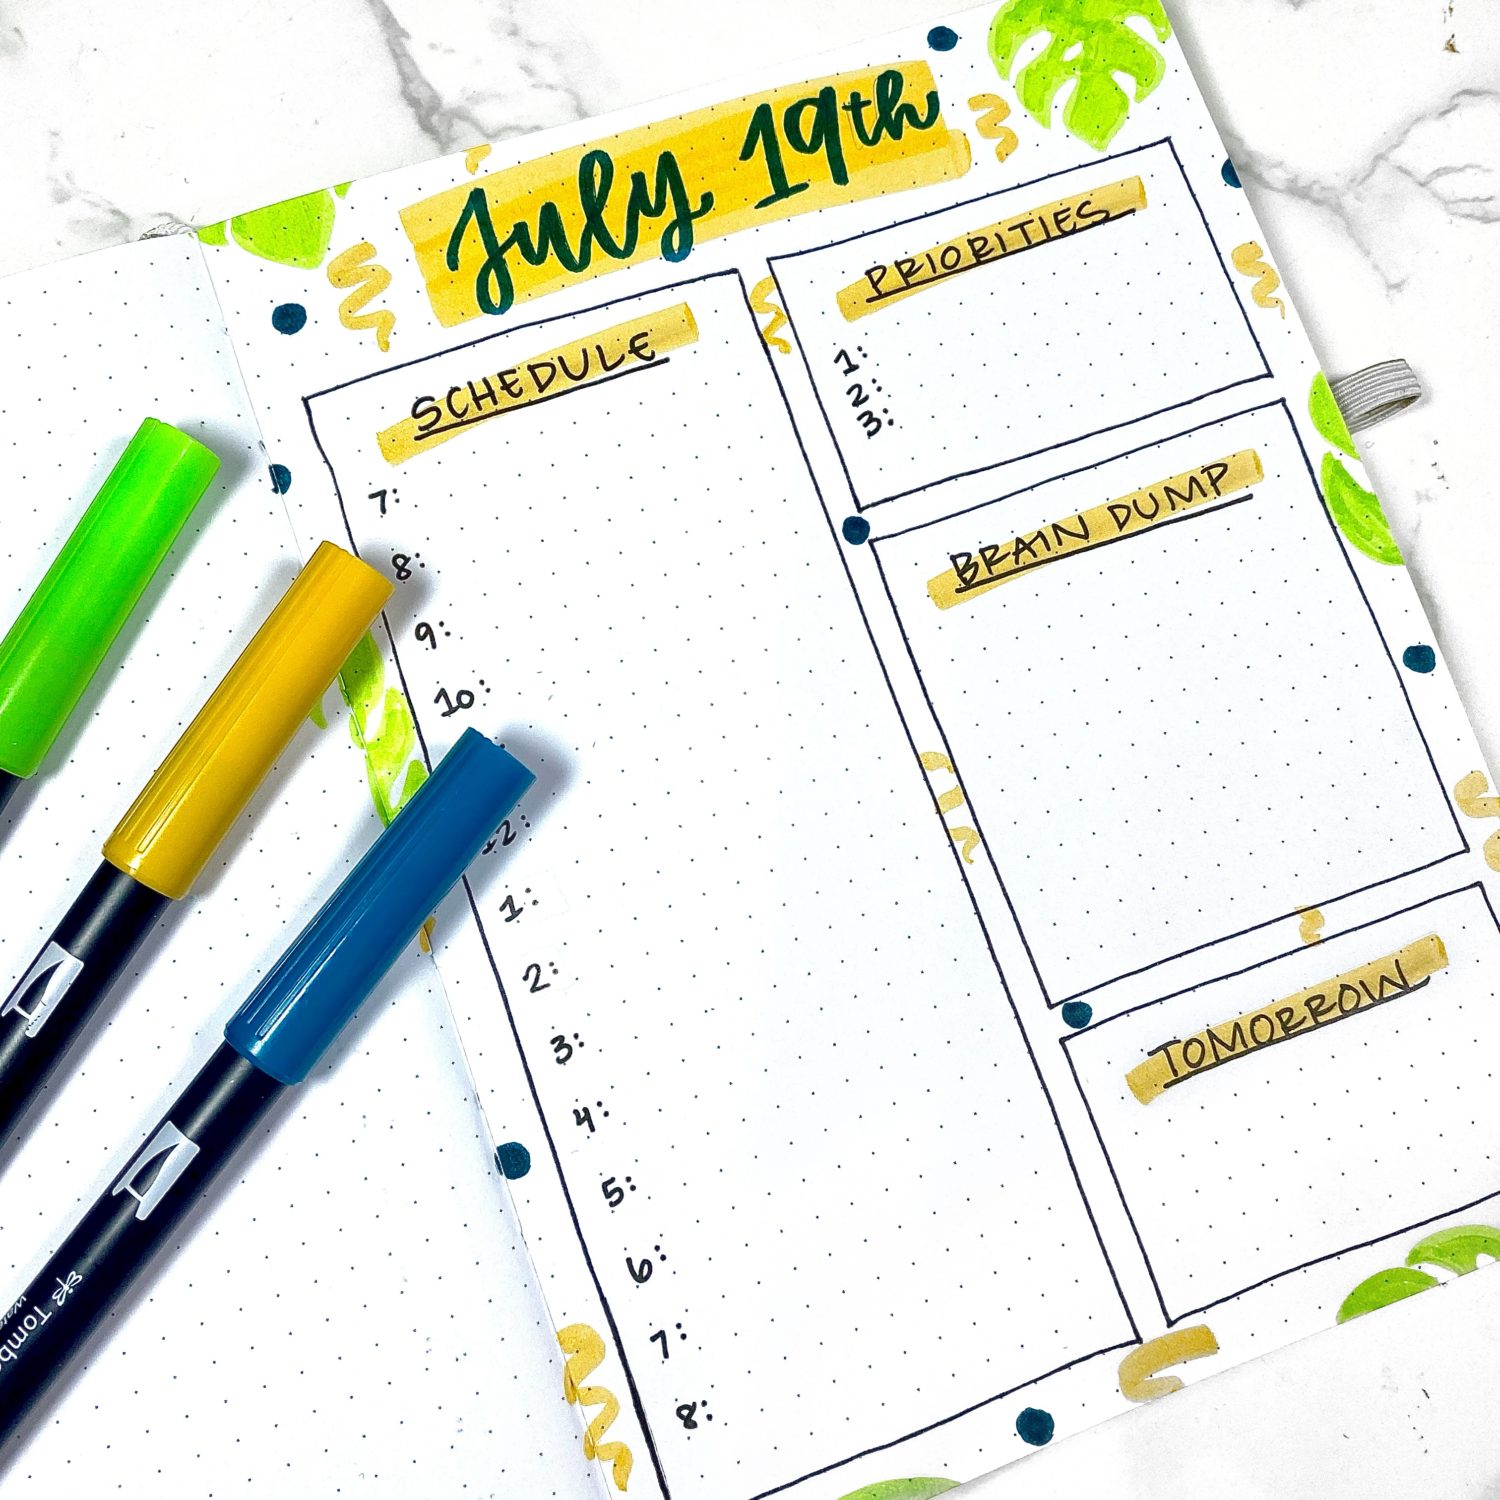 Daily Journal Spread Tutorial - Tombow USA Blog